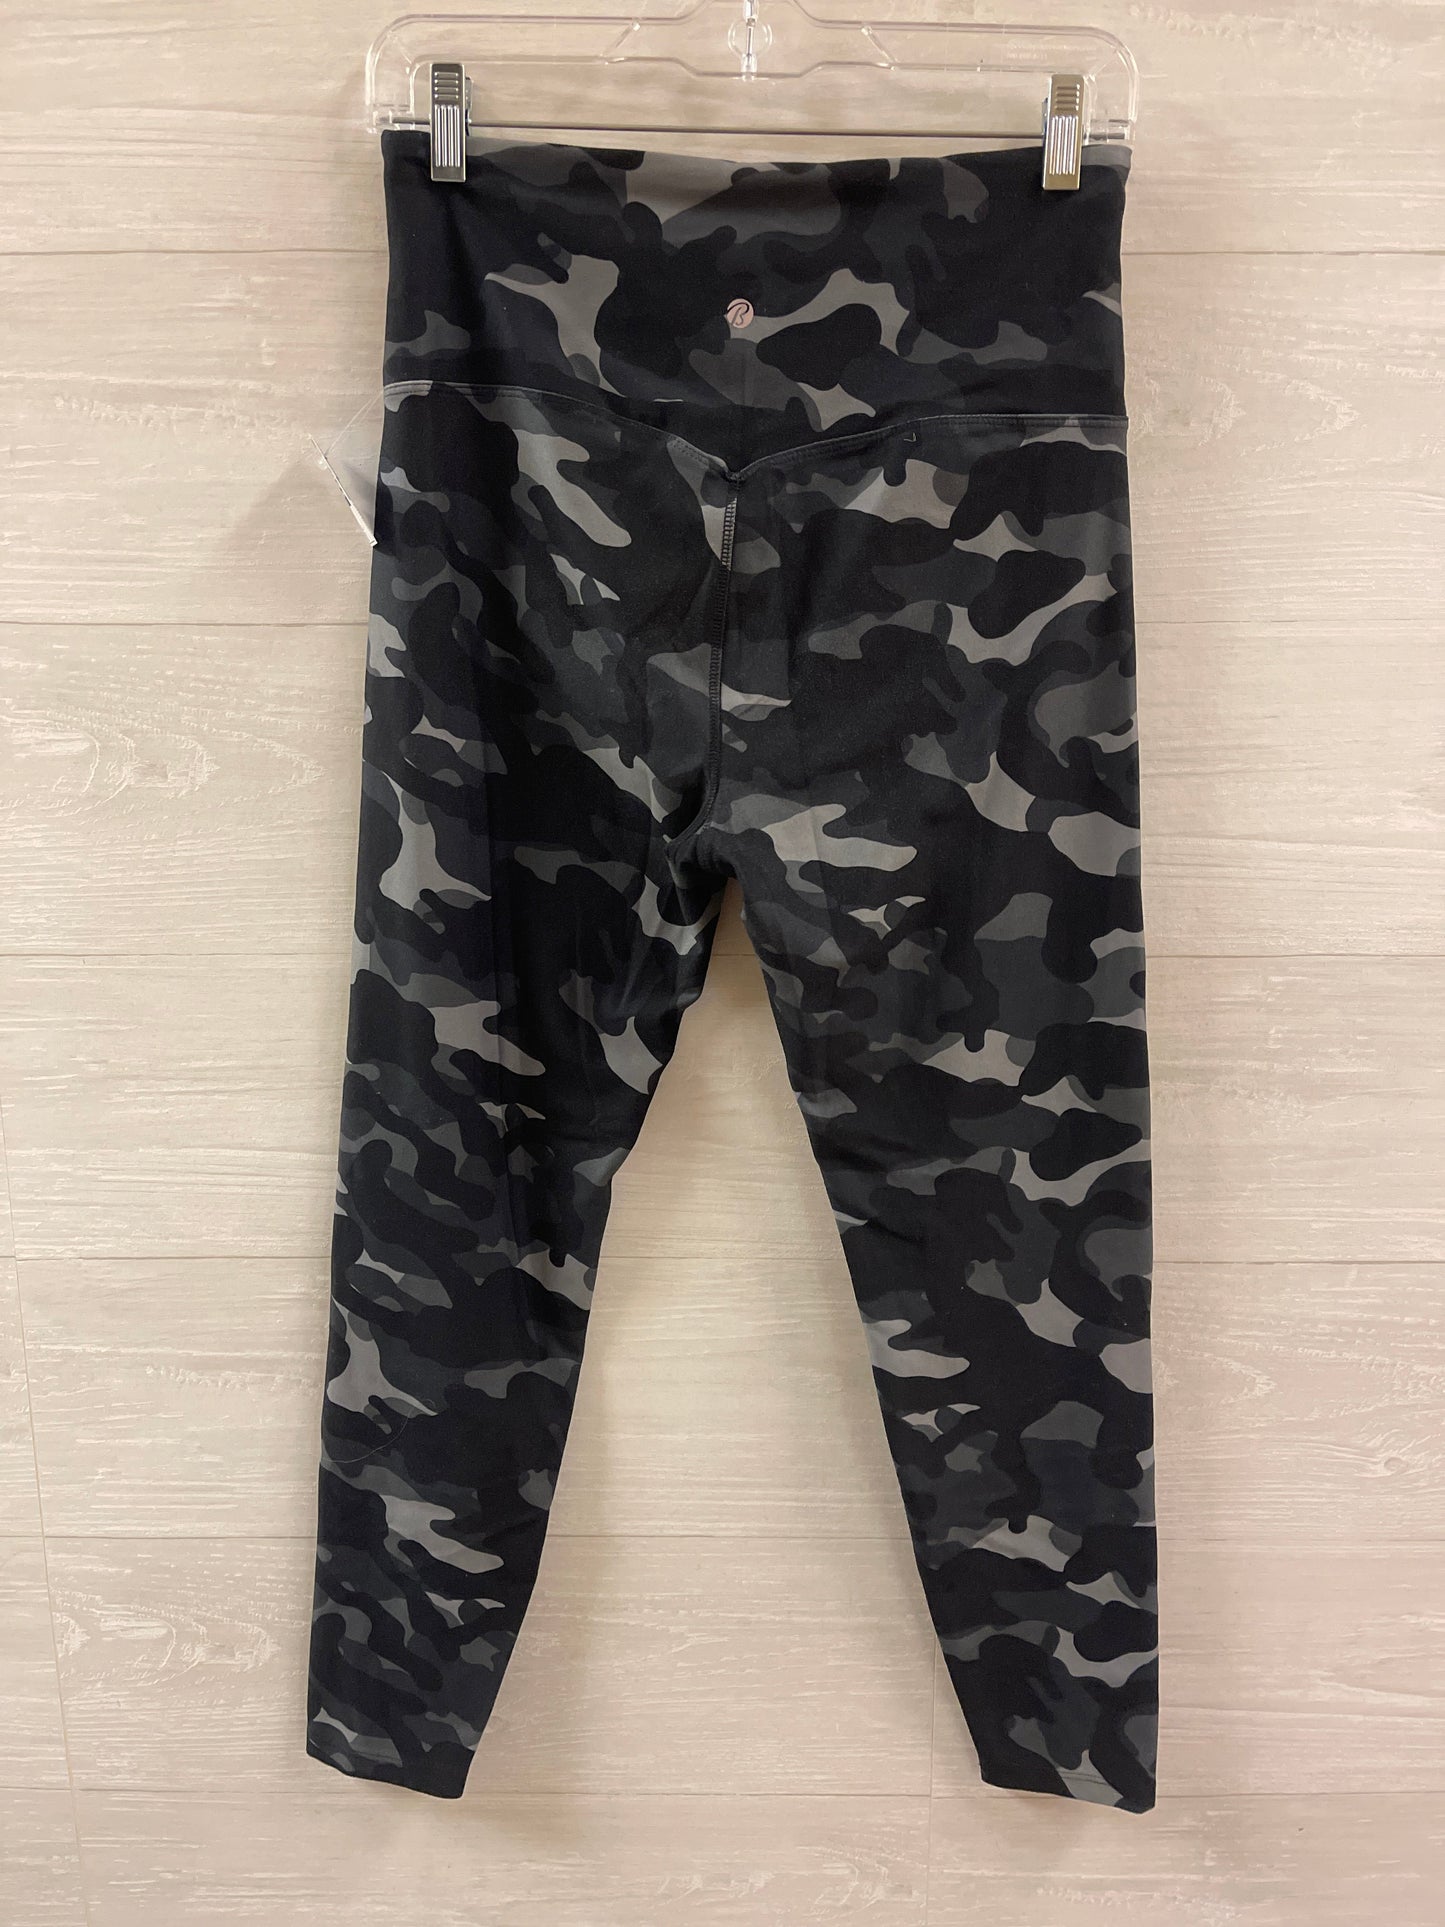 Athletic Leggings By Bally  Size: L